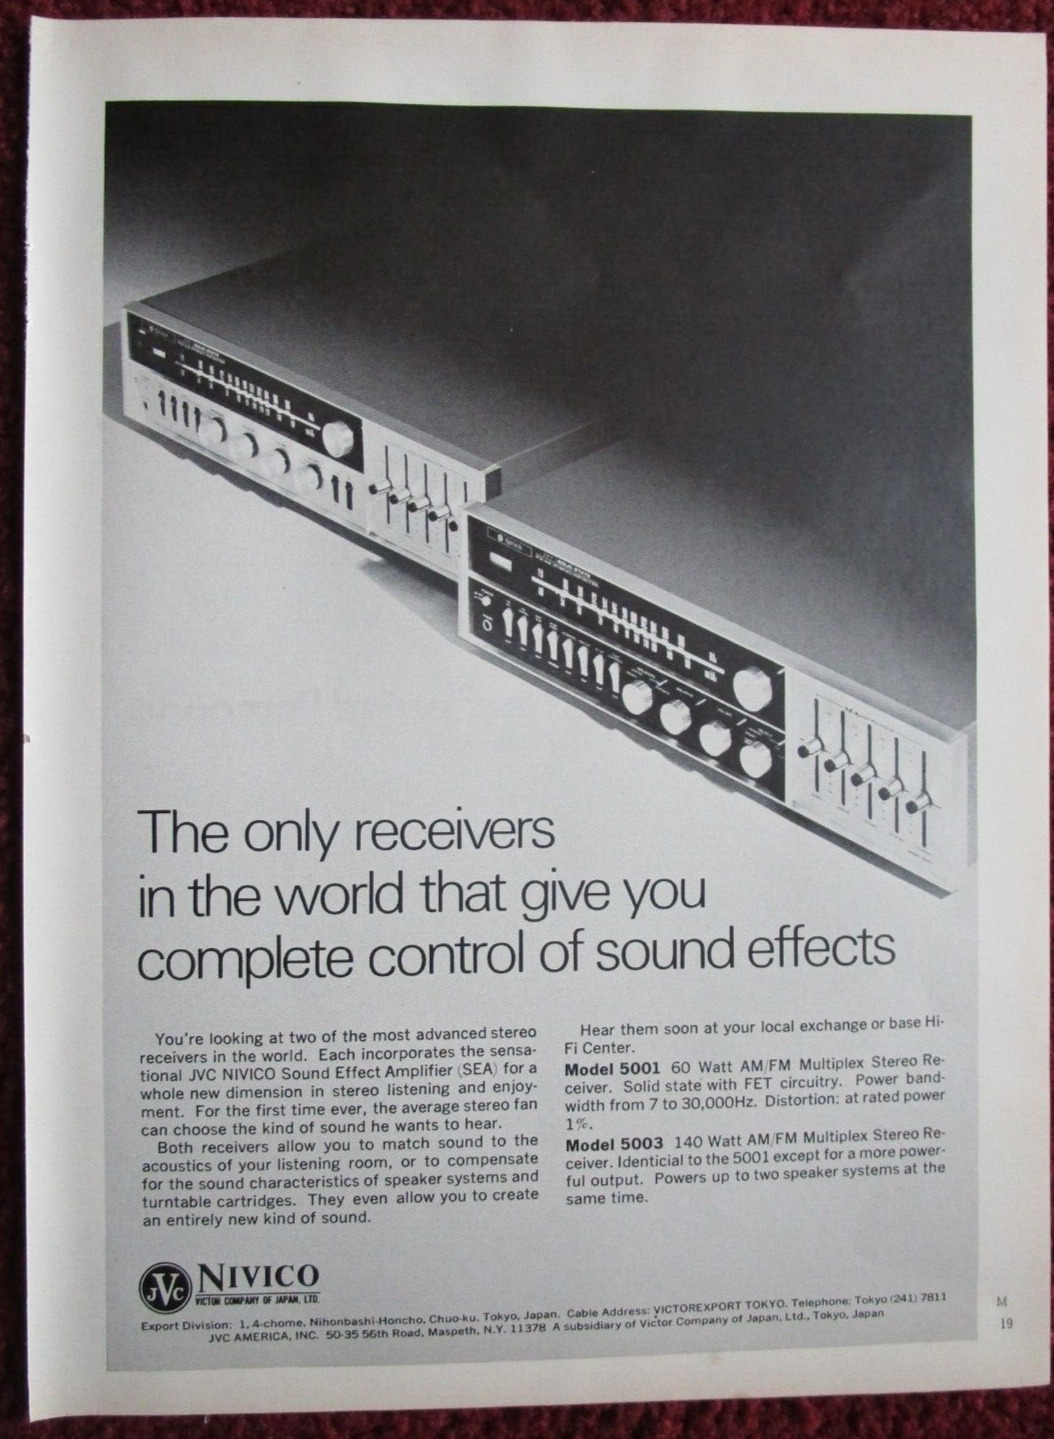 1969 JVC NIVICO 5001 / 5003 Stereo Receiver Print Ad ~ Control Sound Effects